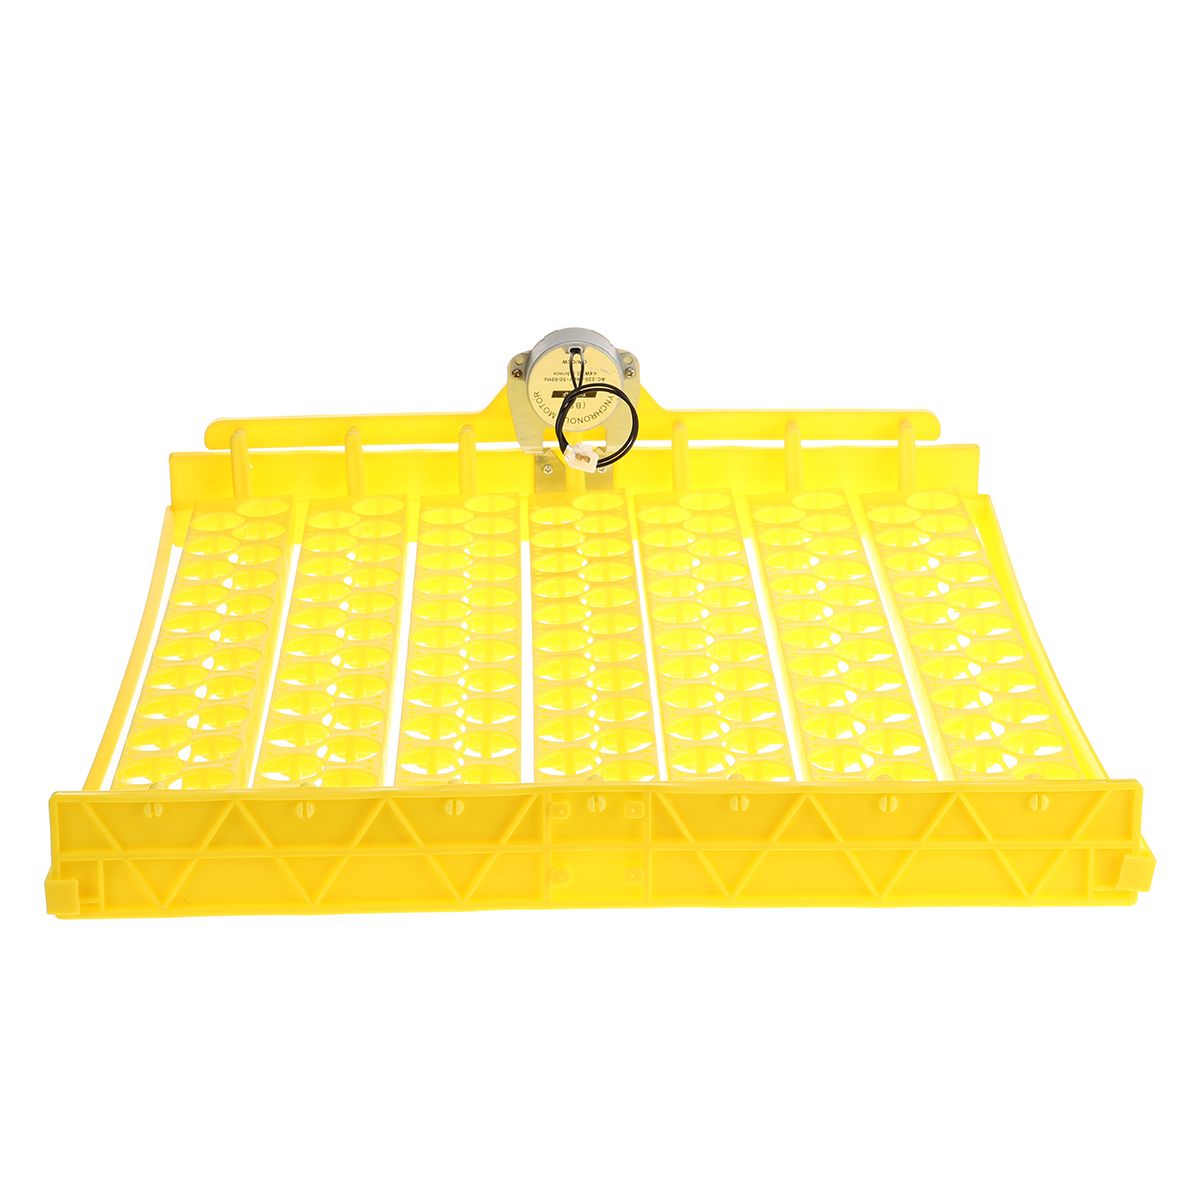 154-Eggs-Quail-Turner-Tray-Container-for-Hatching-Incubator-with-220V-Automatic-Turning-Motor-1719579